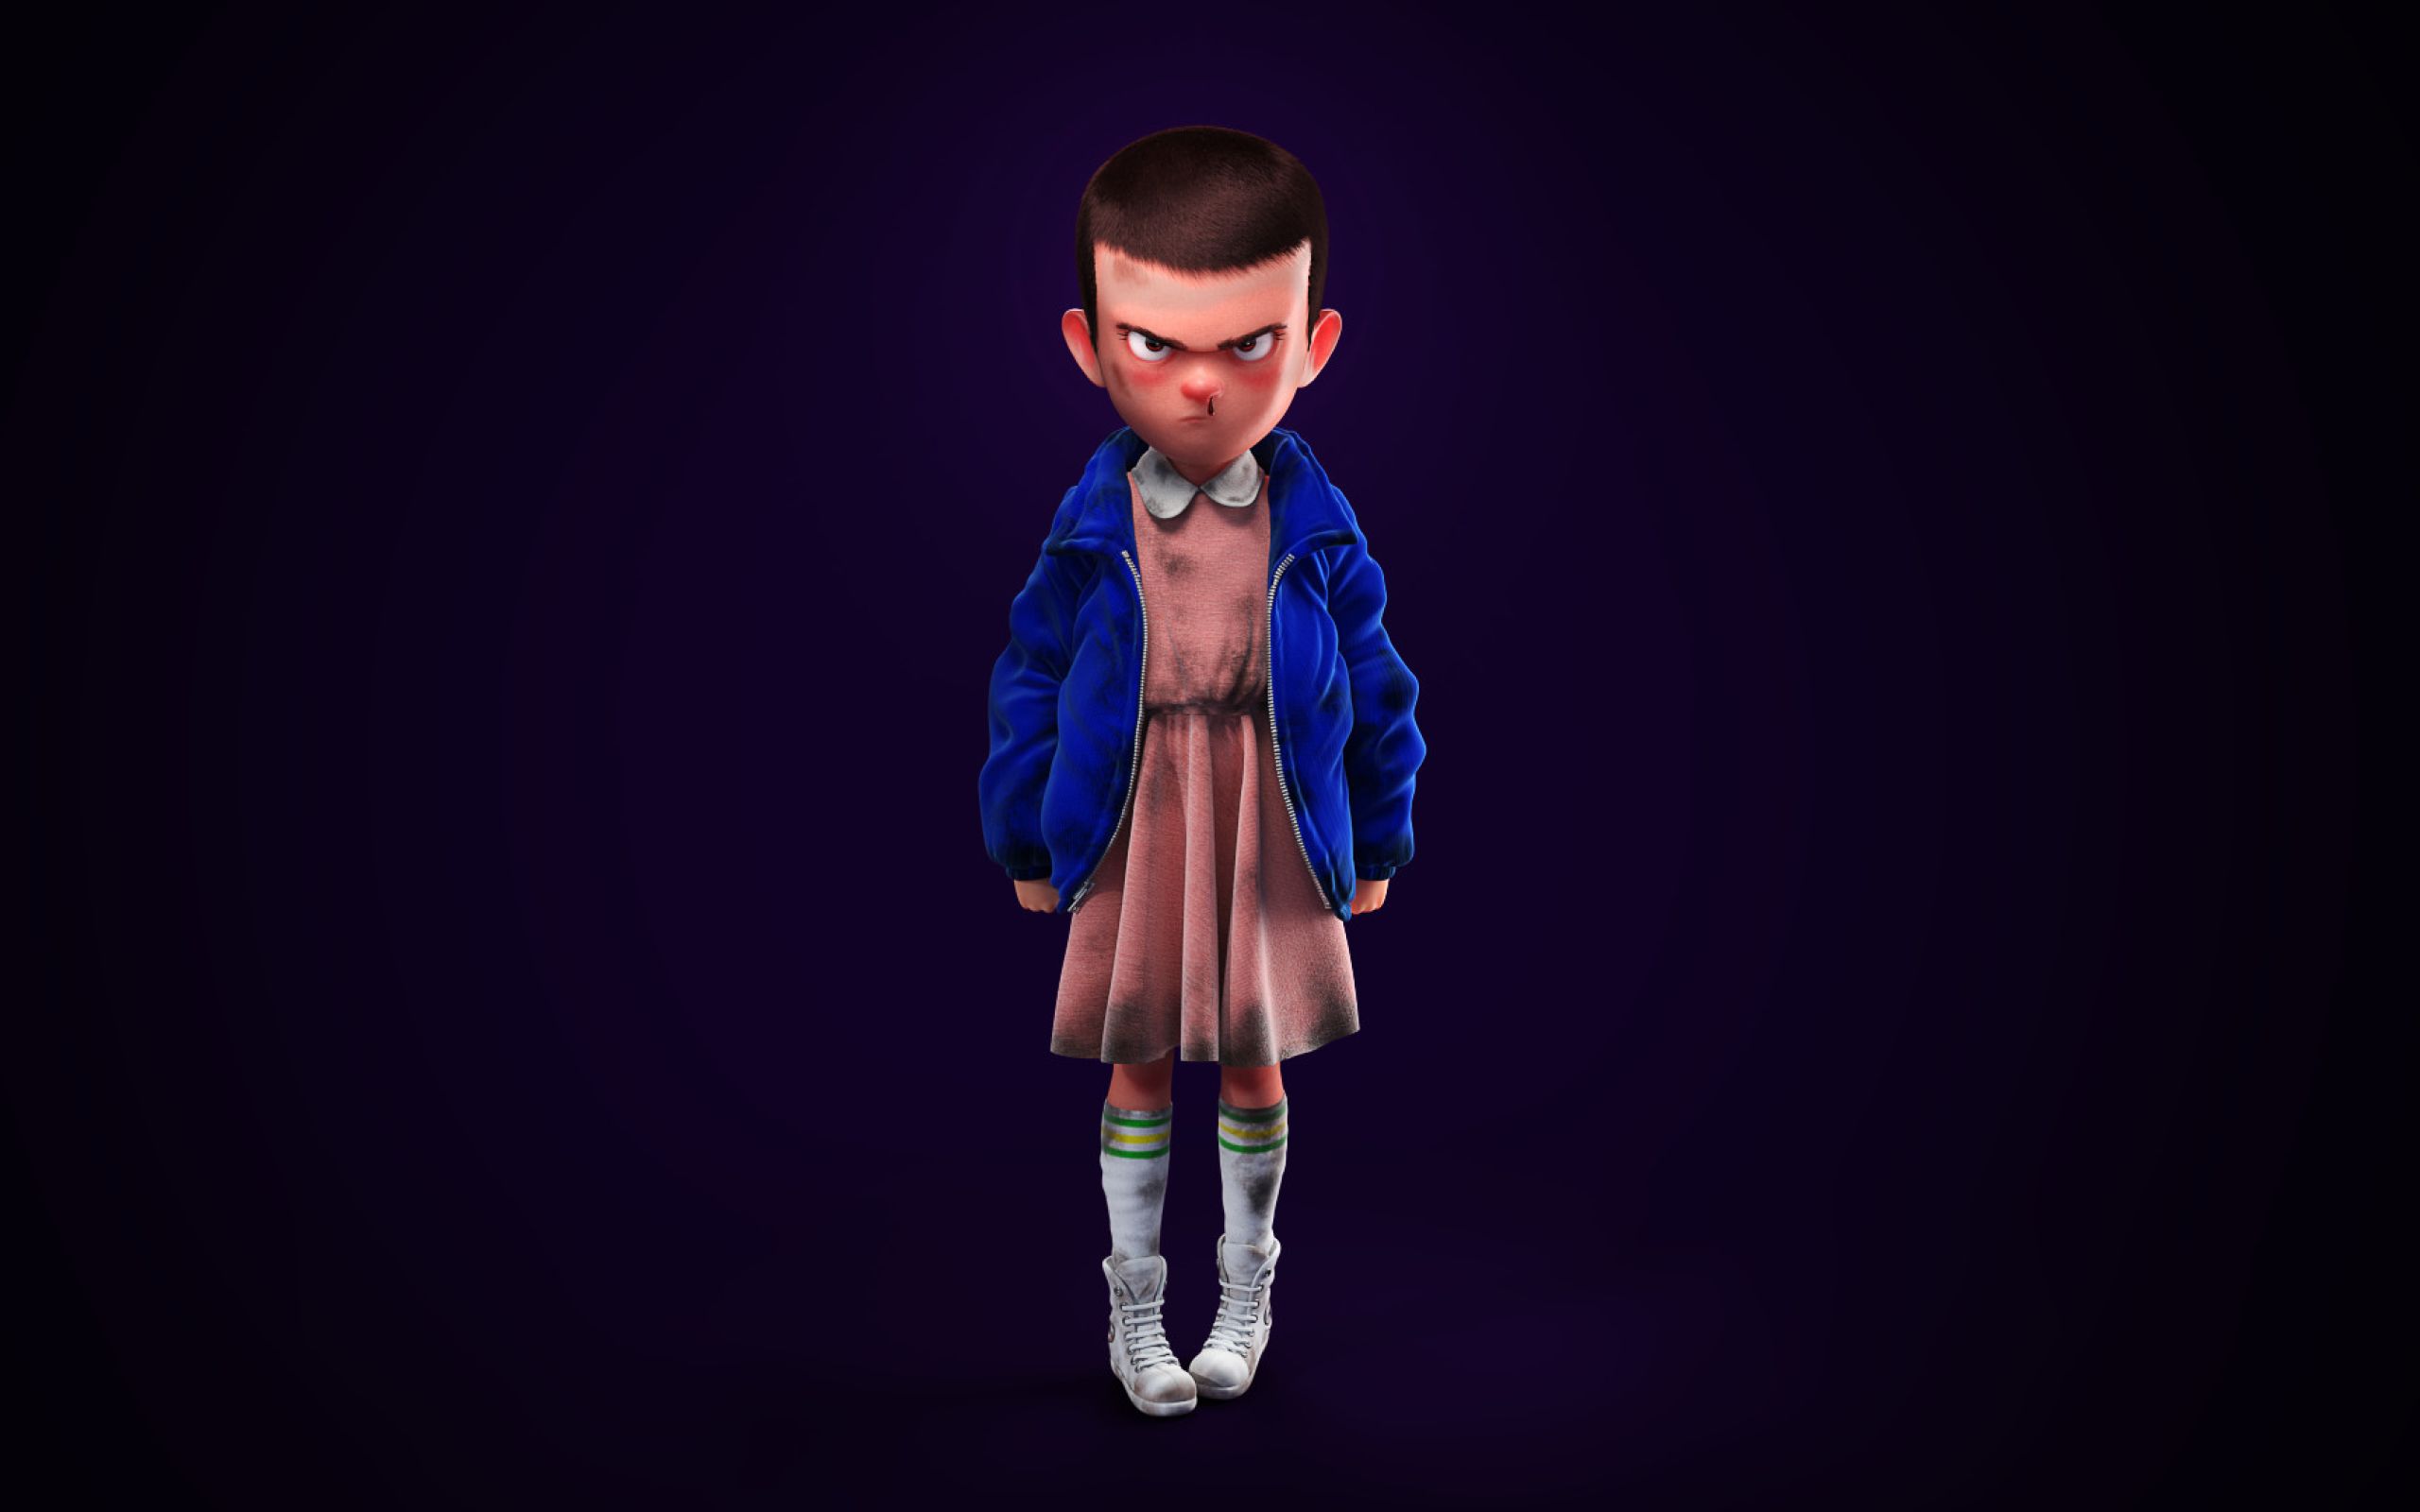 Eleven Stranger Things Art 2560x1600 Resolution Wallpaper, HD TV Series 4K Wallpaper, Image, Photo and Background